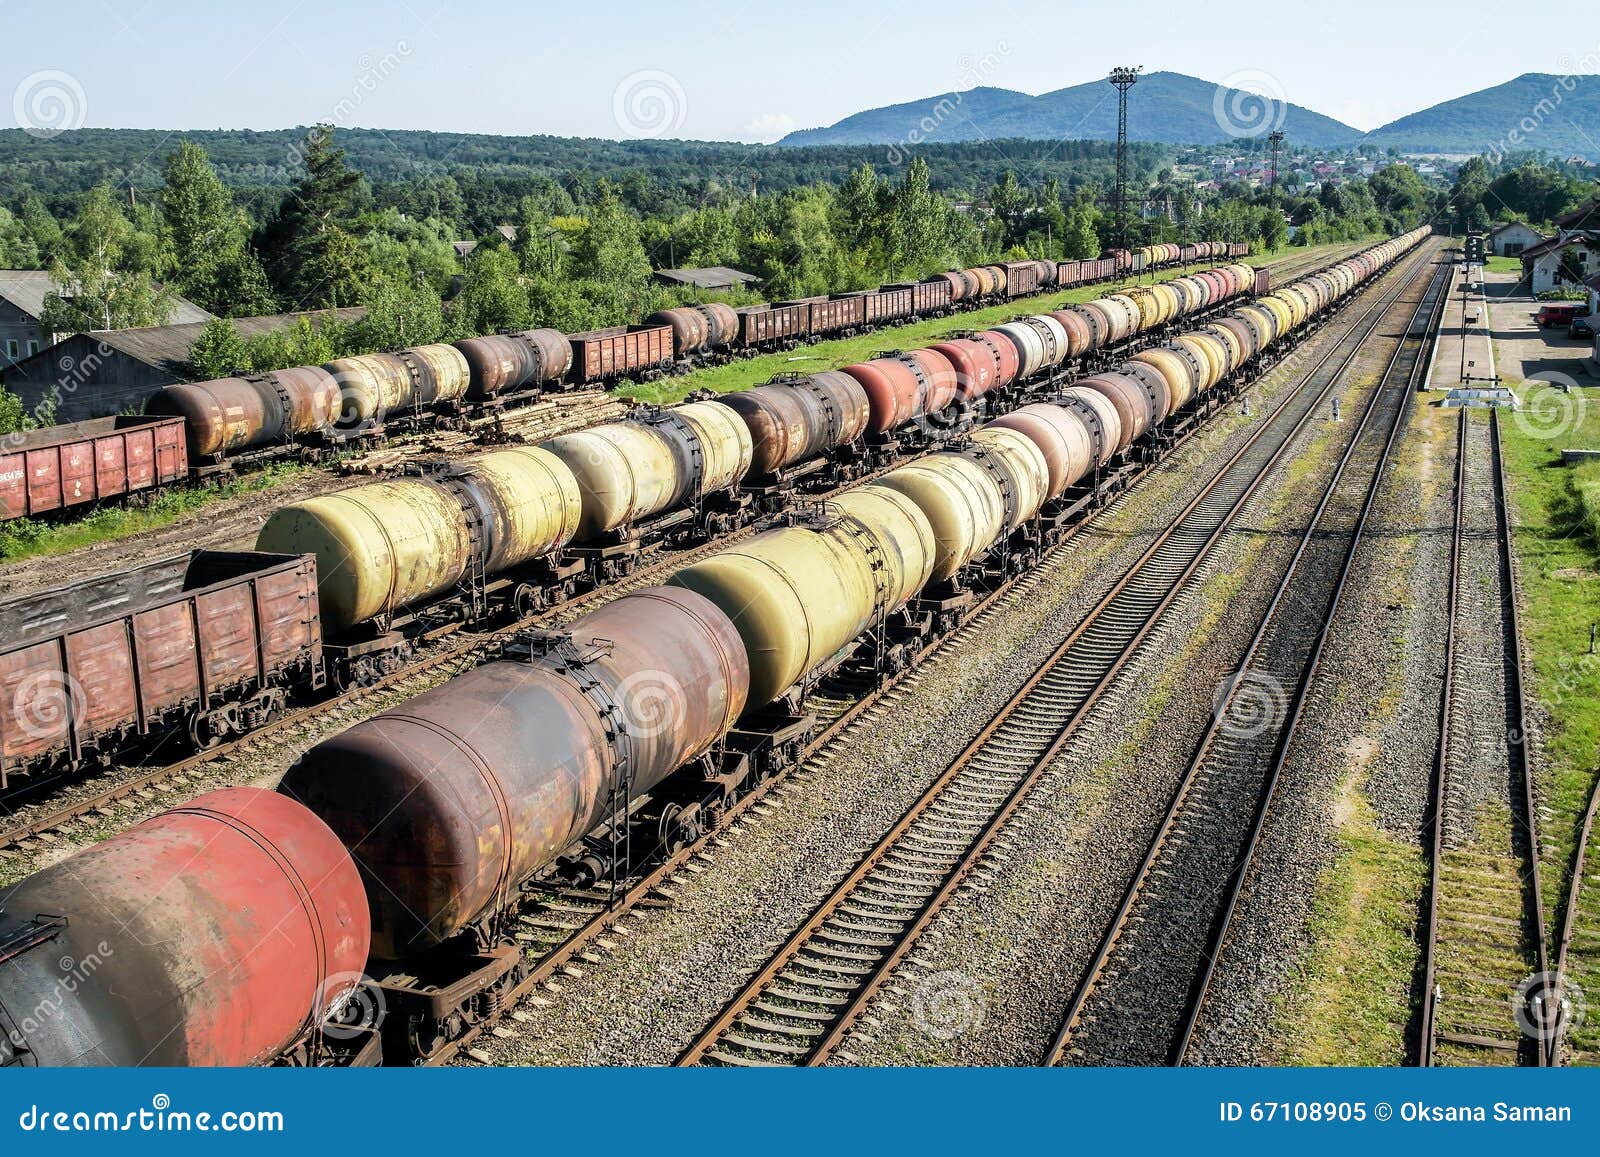 Transporting Crude Oil By Rail